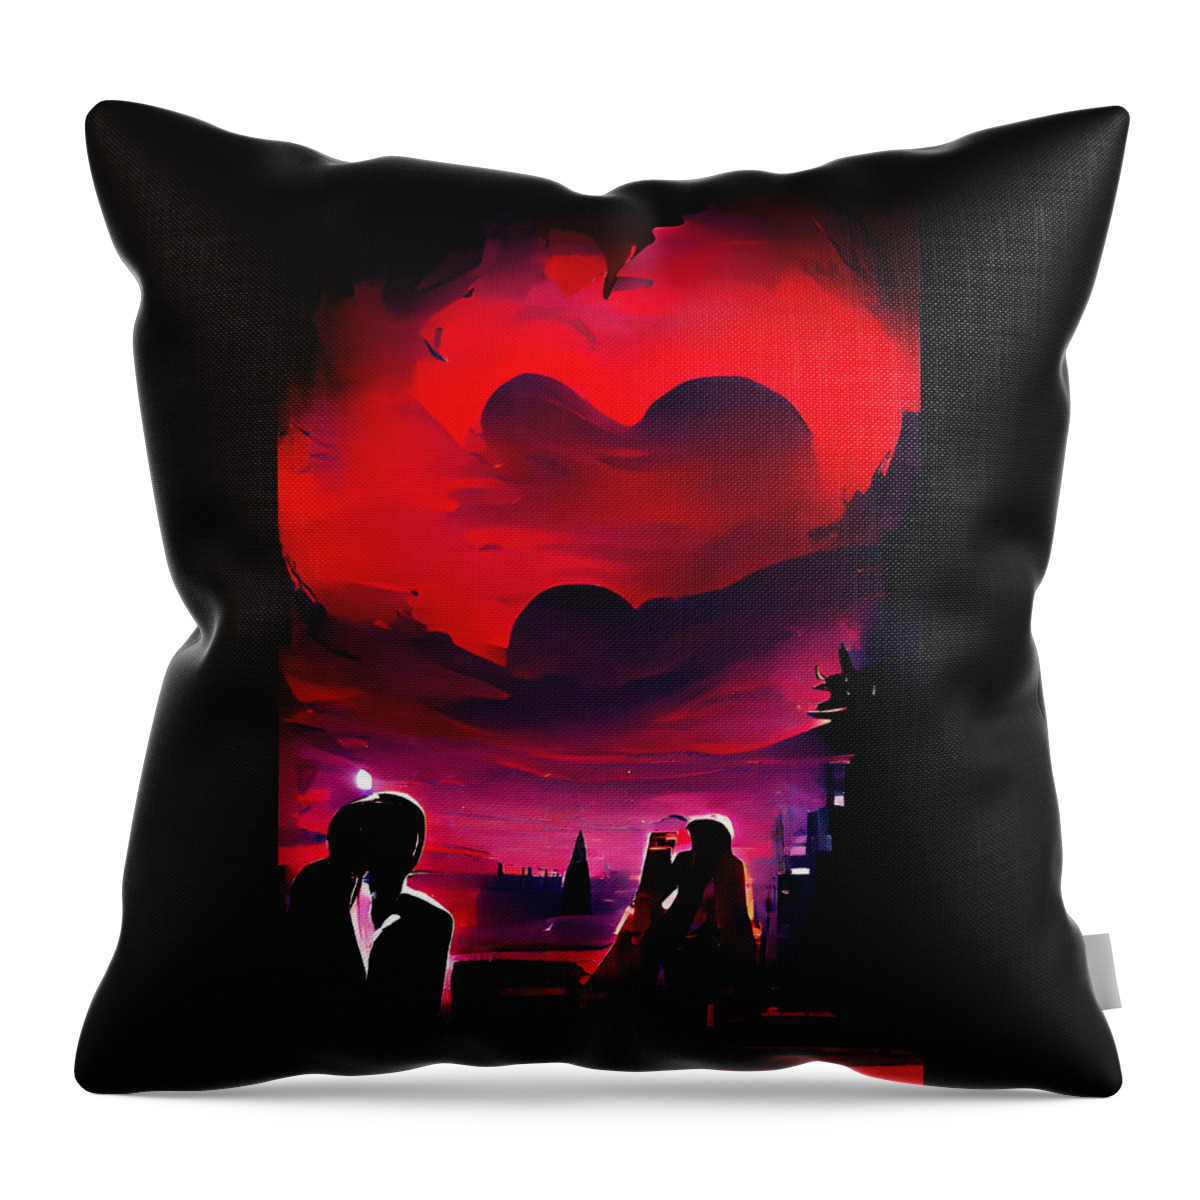 Cool Art Throw Pillow featuring the digital art Love is in the Air by Ronald Mills